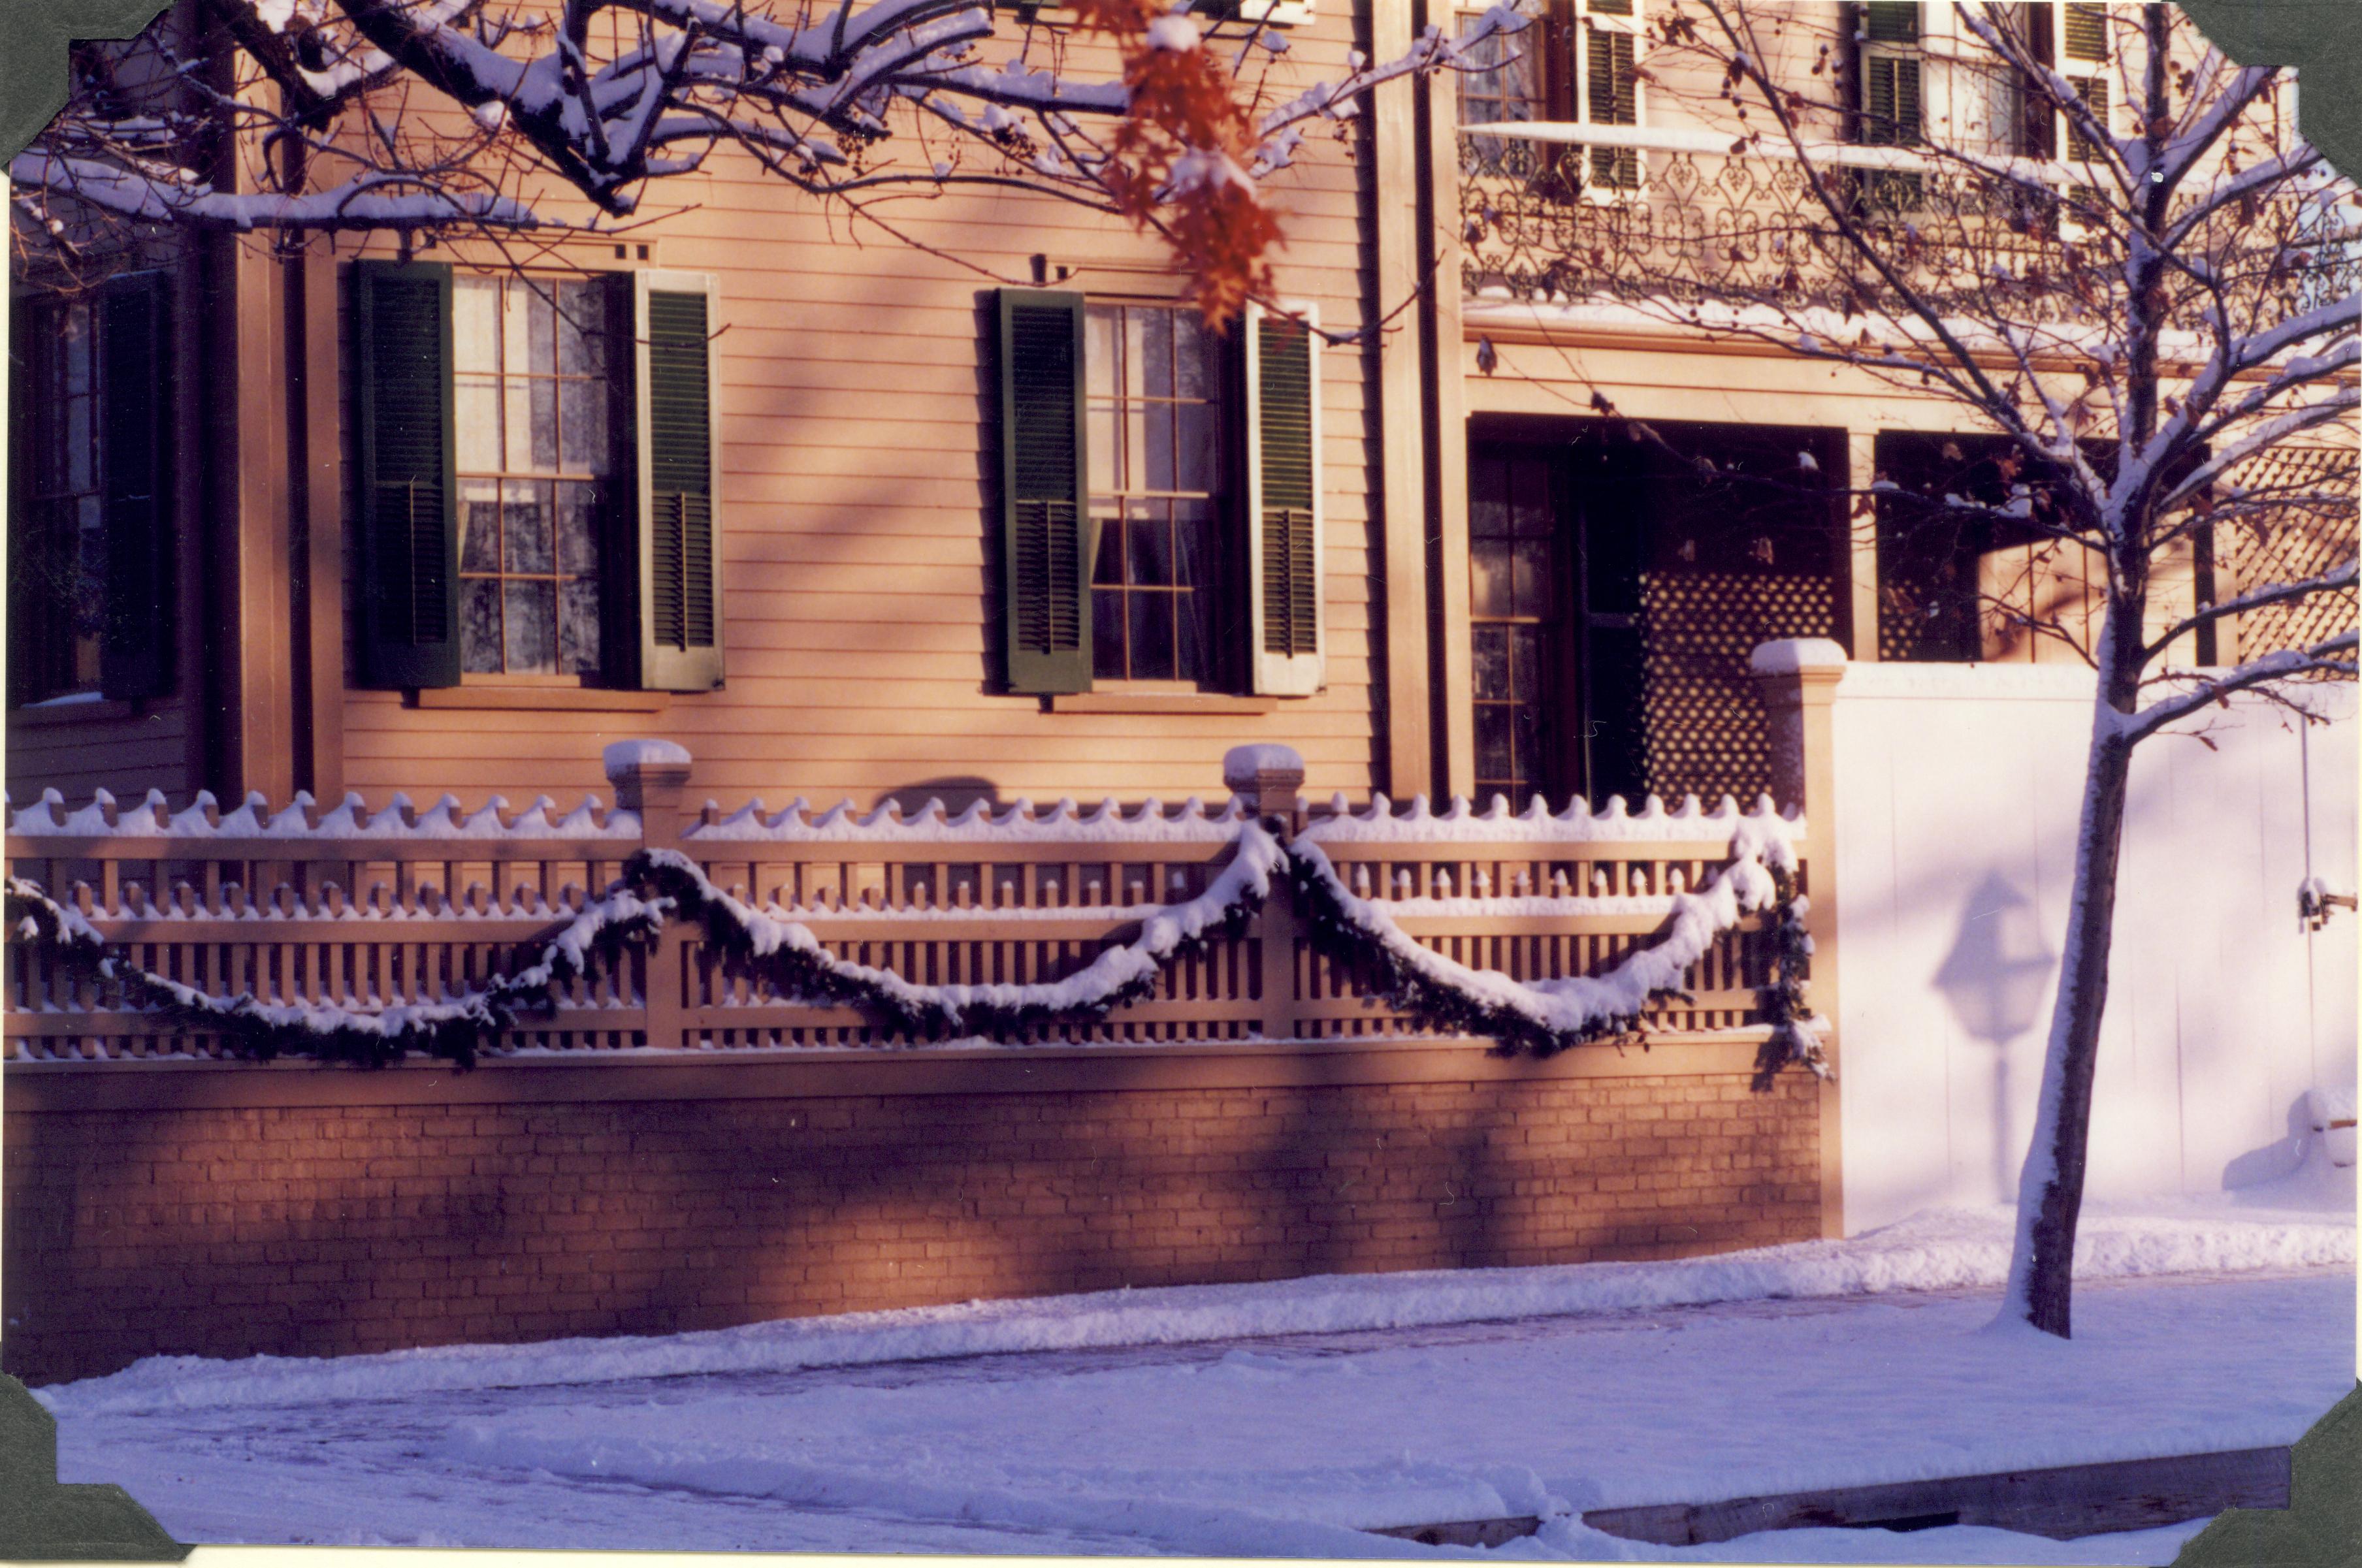 NA Lincoln Home NHS- Christmas in Lincoln Neighborhood 1989 Christmas, neighborhood, decorations